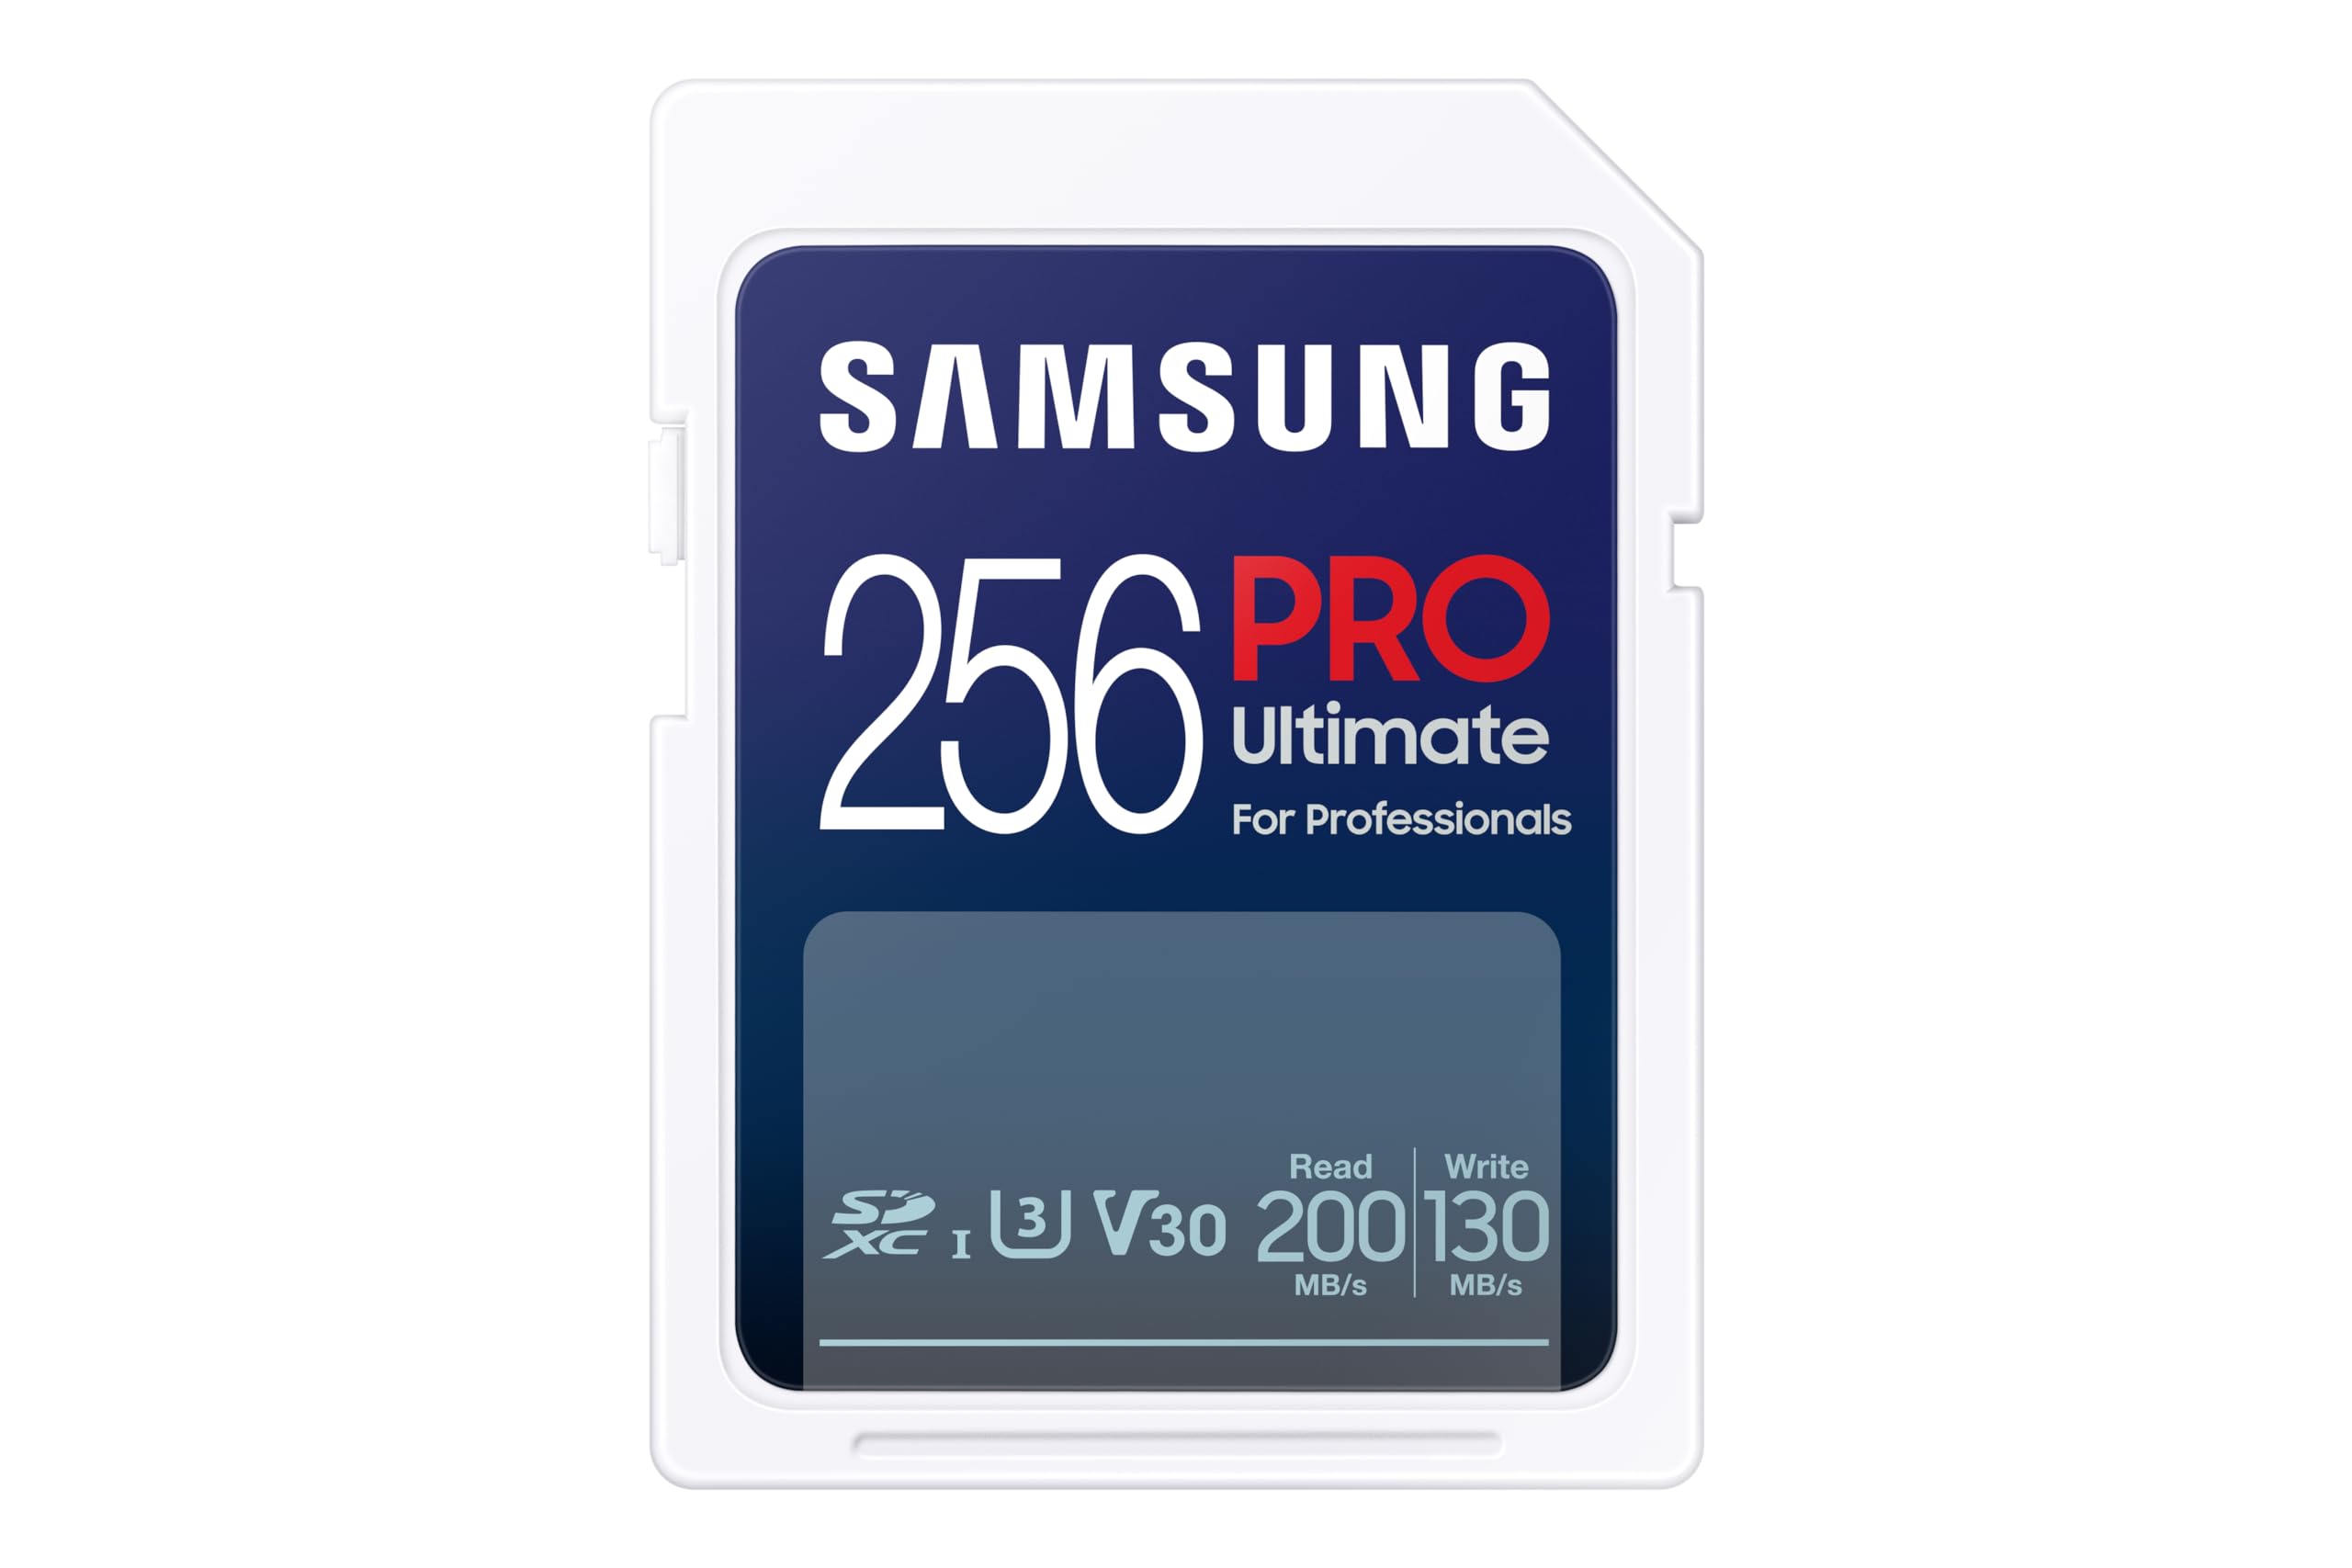 SAMSUNG PRO Ultimate Full Size 256GB SDXC Memory Card, Up to 200 MB/s, 4K UHD, UHS-I, C10, U3, V30, A2, for DSLR, Mirrorless Cameras, PCs, MB-SY256S/AM